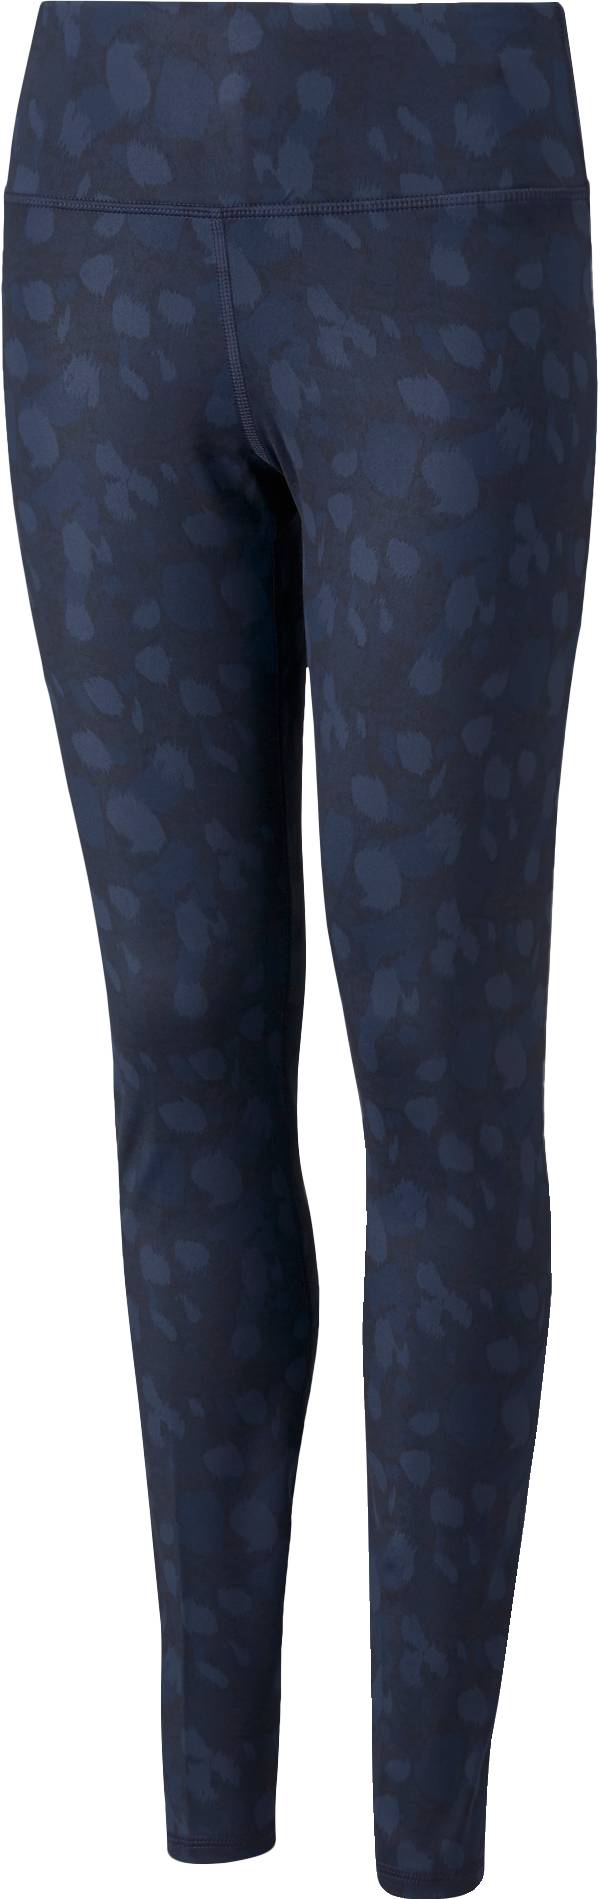 Puma Women's Printed Golf Tights product image